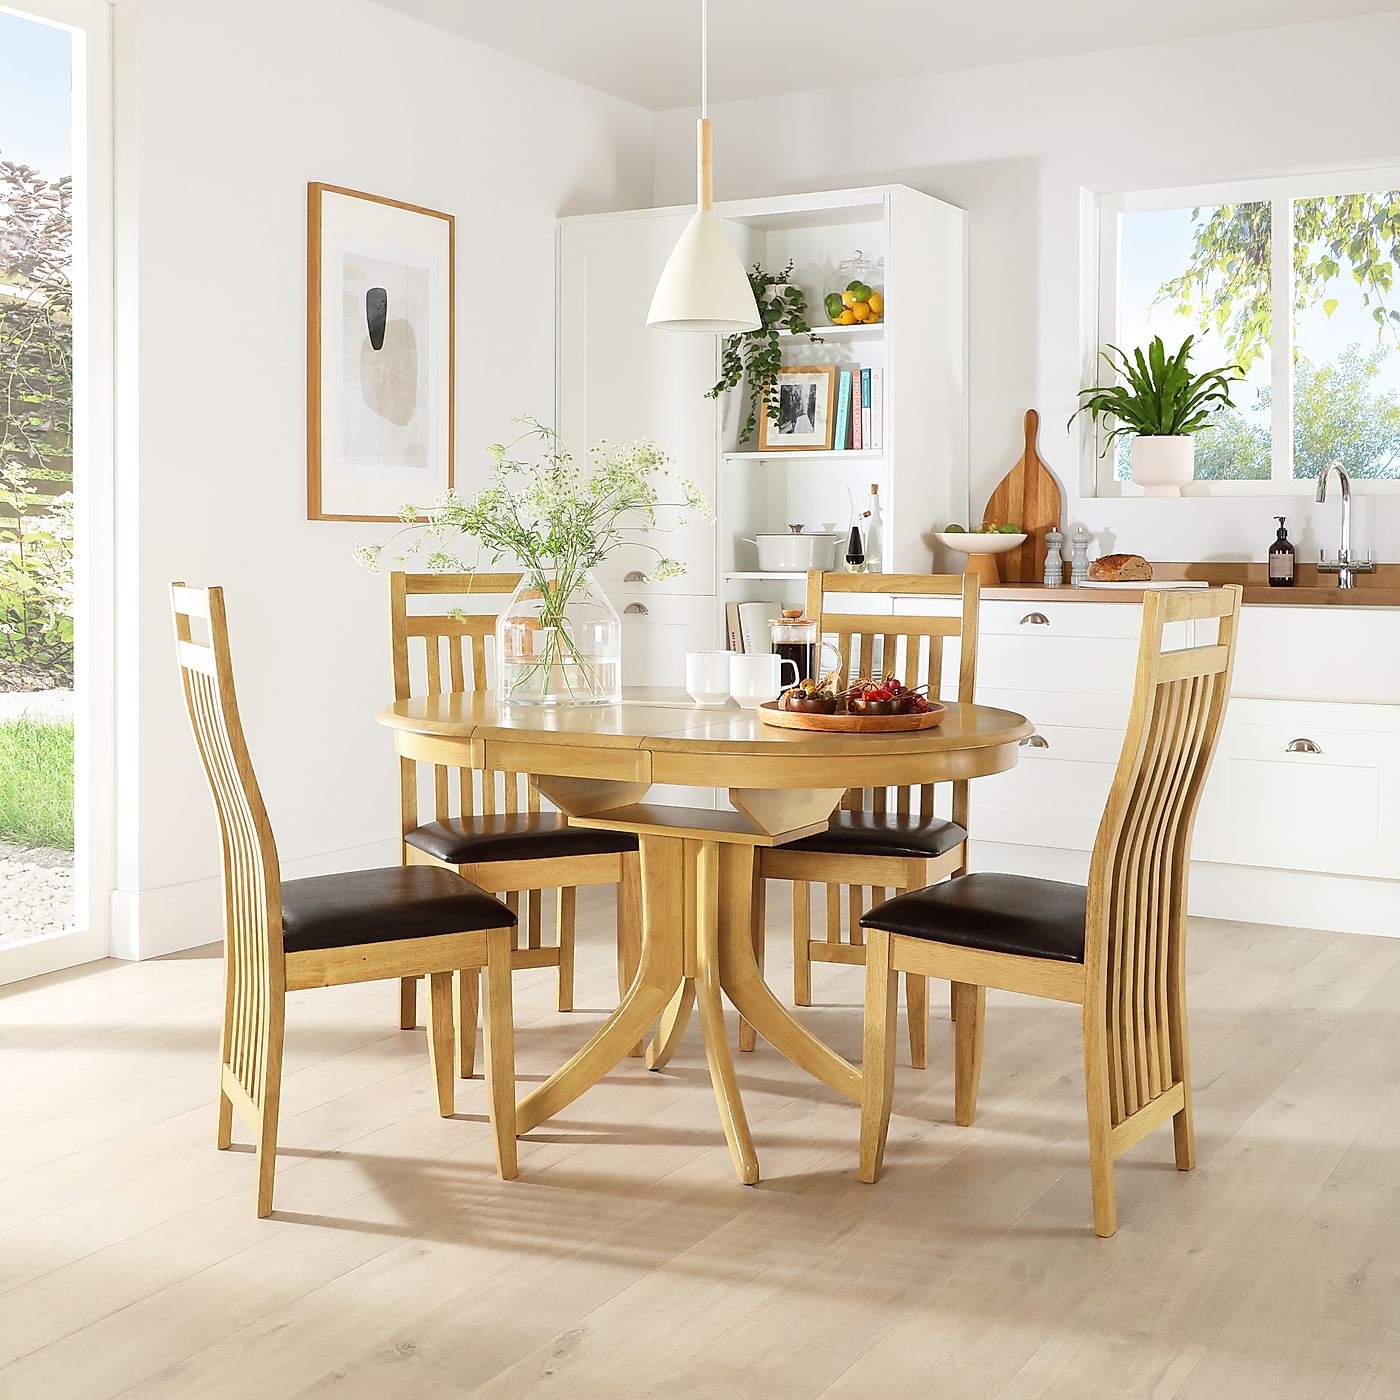 Small Round Extendable Dining Table And Chairs / It would look great